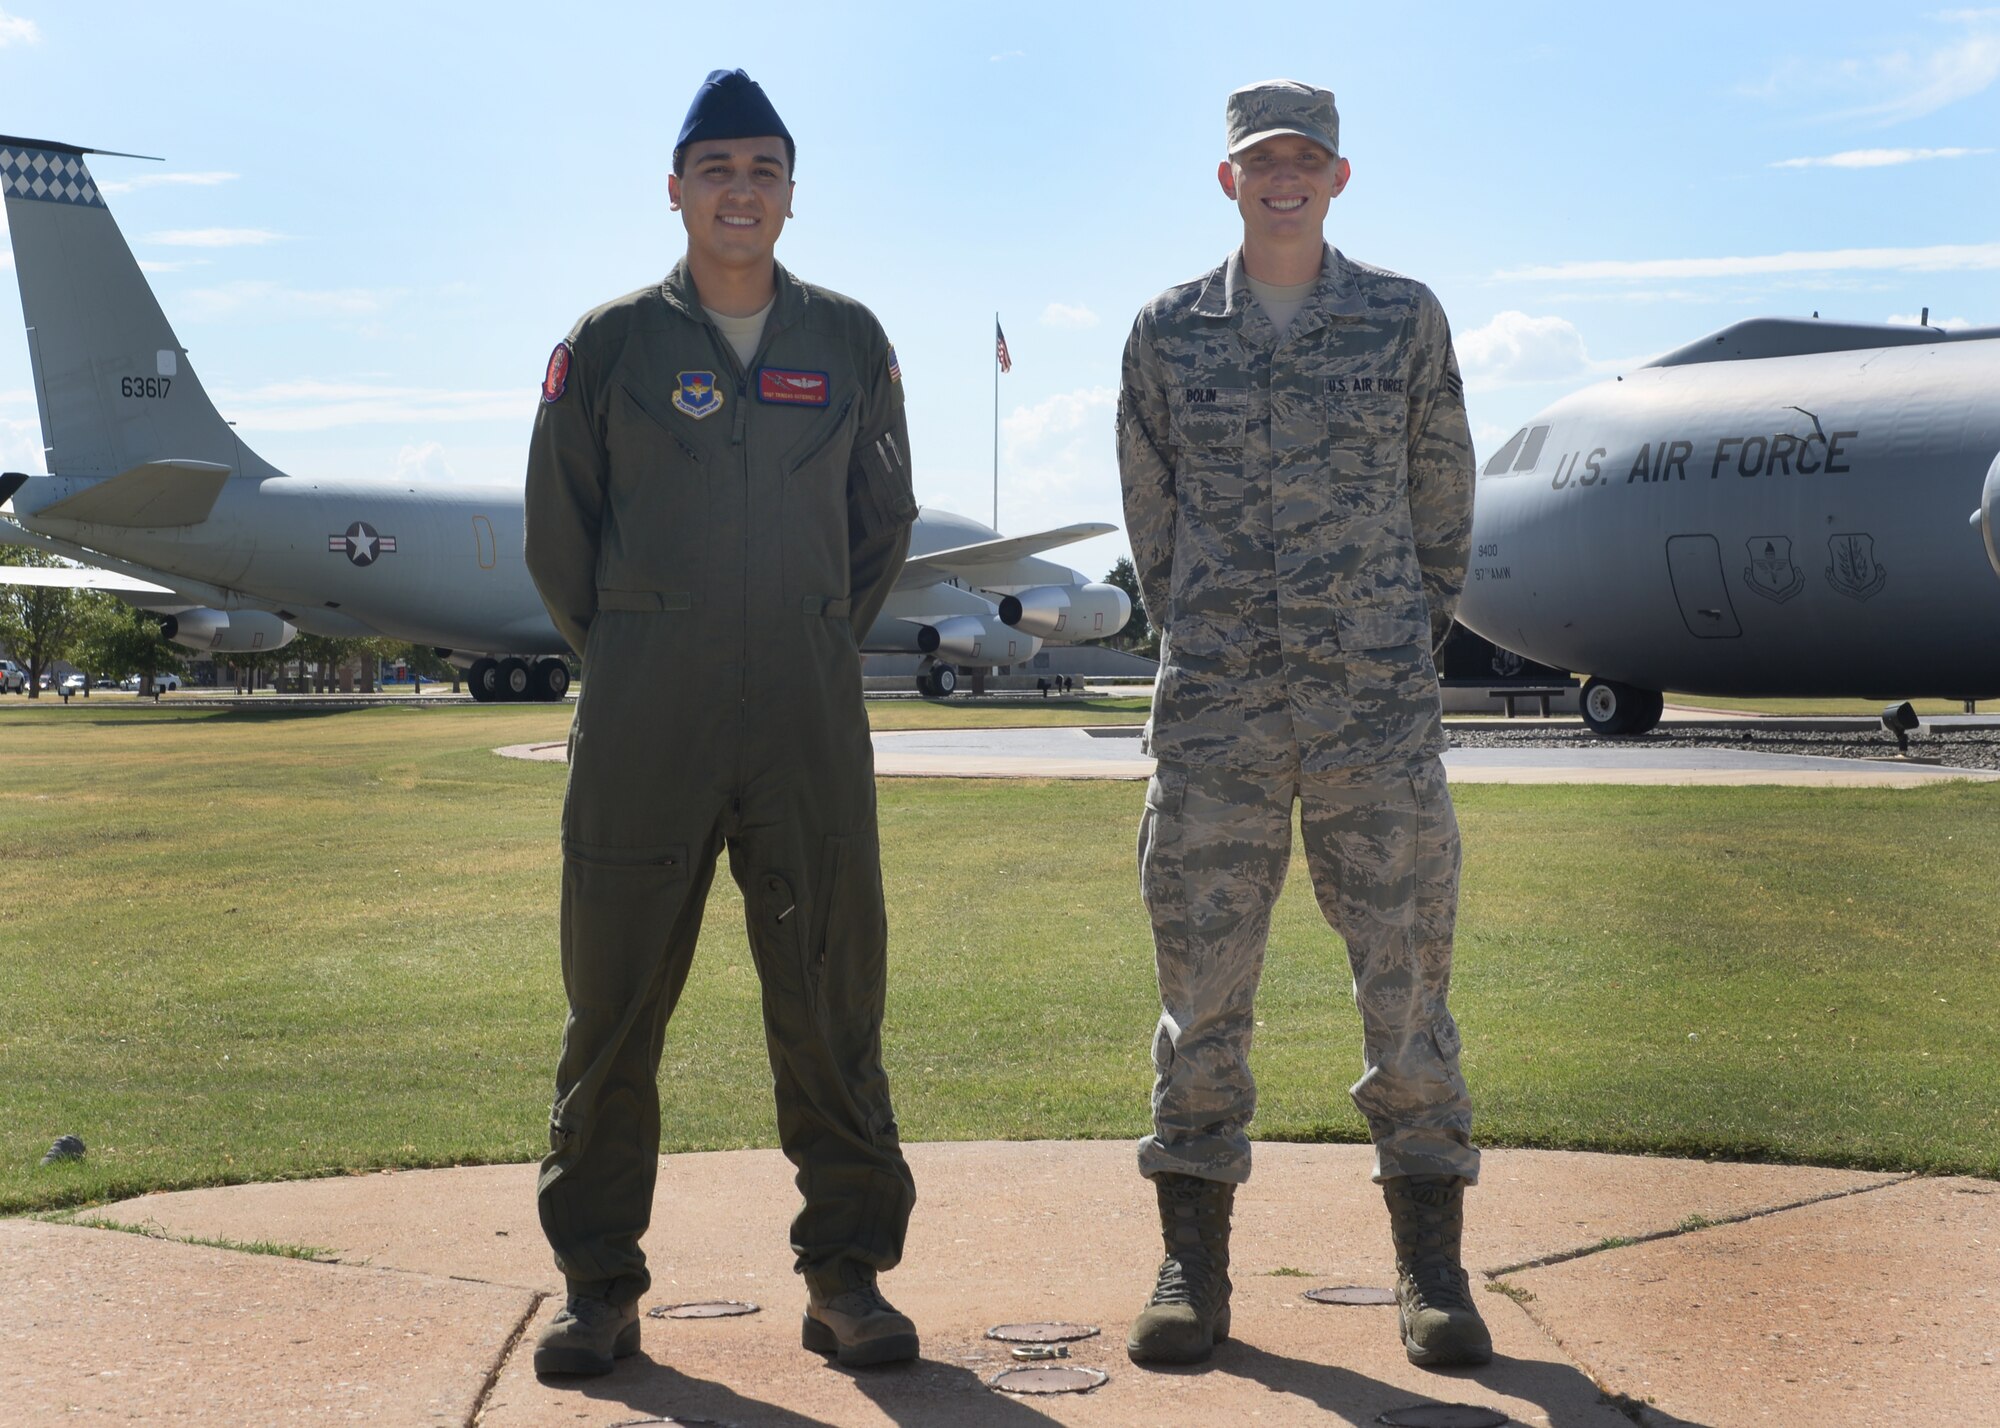 U.S. Air Force Staff Sgt. Trinidad Gutierrez, left, an instructor loadmaster with the 58th Airlift Squadron, and U.S. Air Force Senior Airman Bart Bolin, bioenvironmental engineering technician with 97th Medical Operations Squadron, stand together at Wings of Freedom Park, Aug. 25, 2014. Gutierrez and Bolin plan to run in the Air Force Marathon Sept. 20. (U.S. Air Force photo by Airman 1st Class Nathan Clark/Released) 